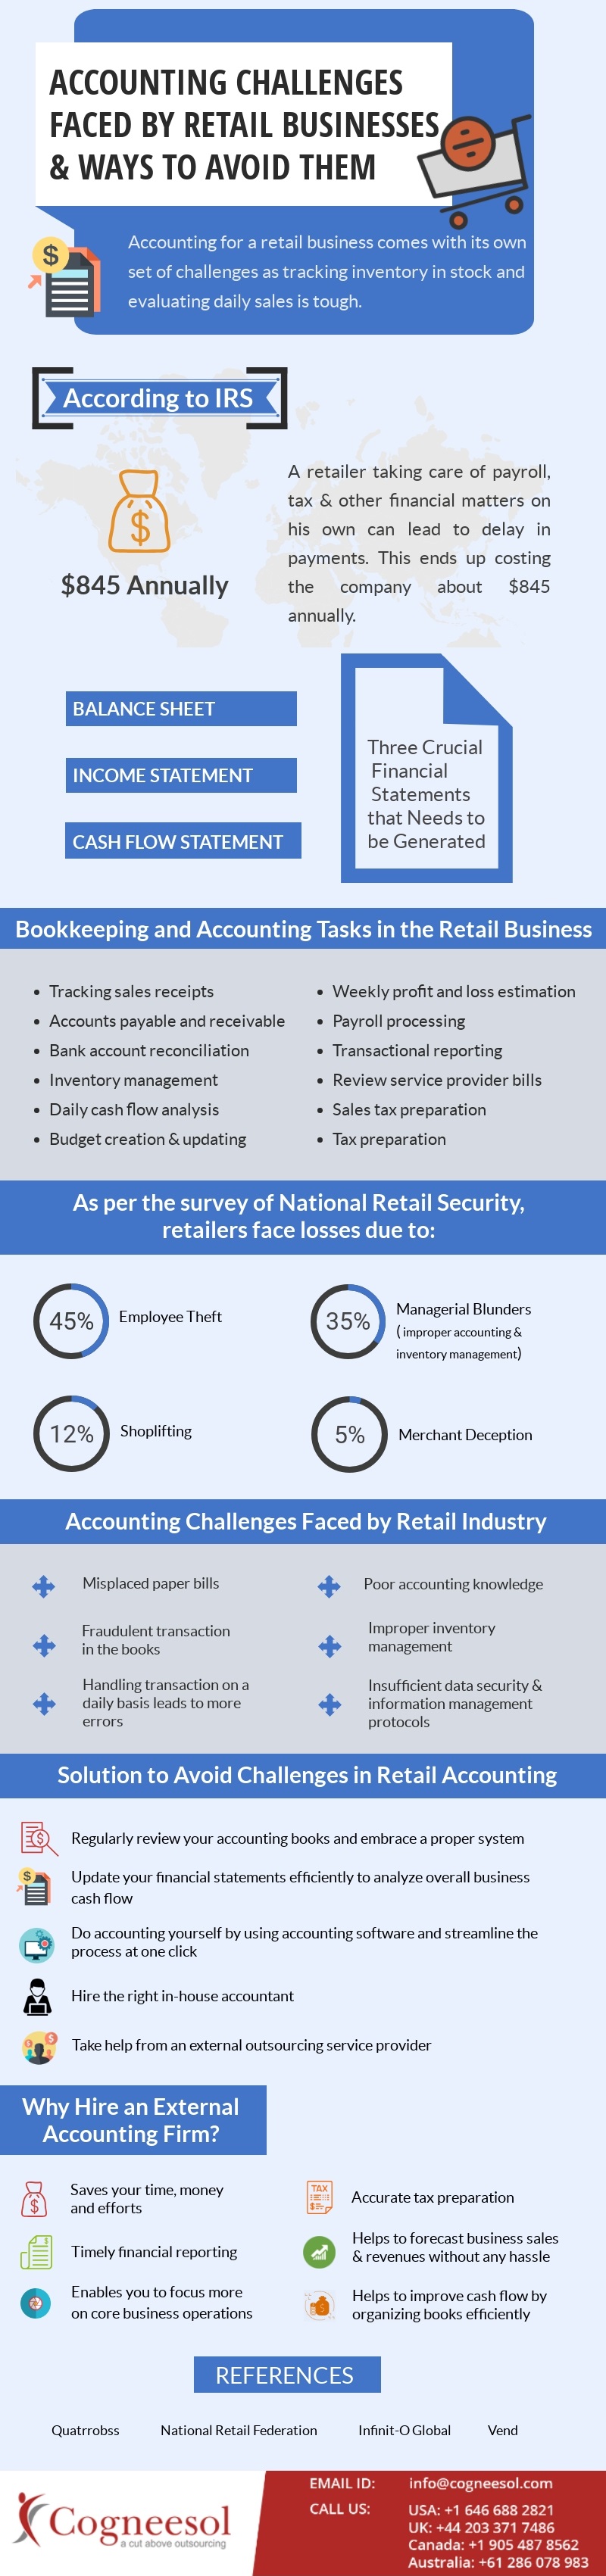 accounting-Challenges-Facing-Retailers